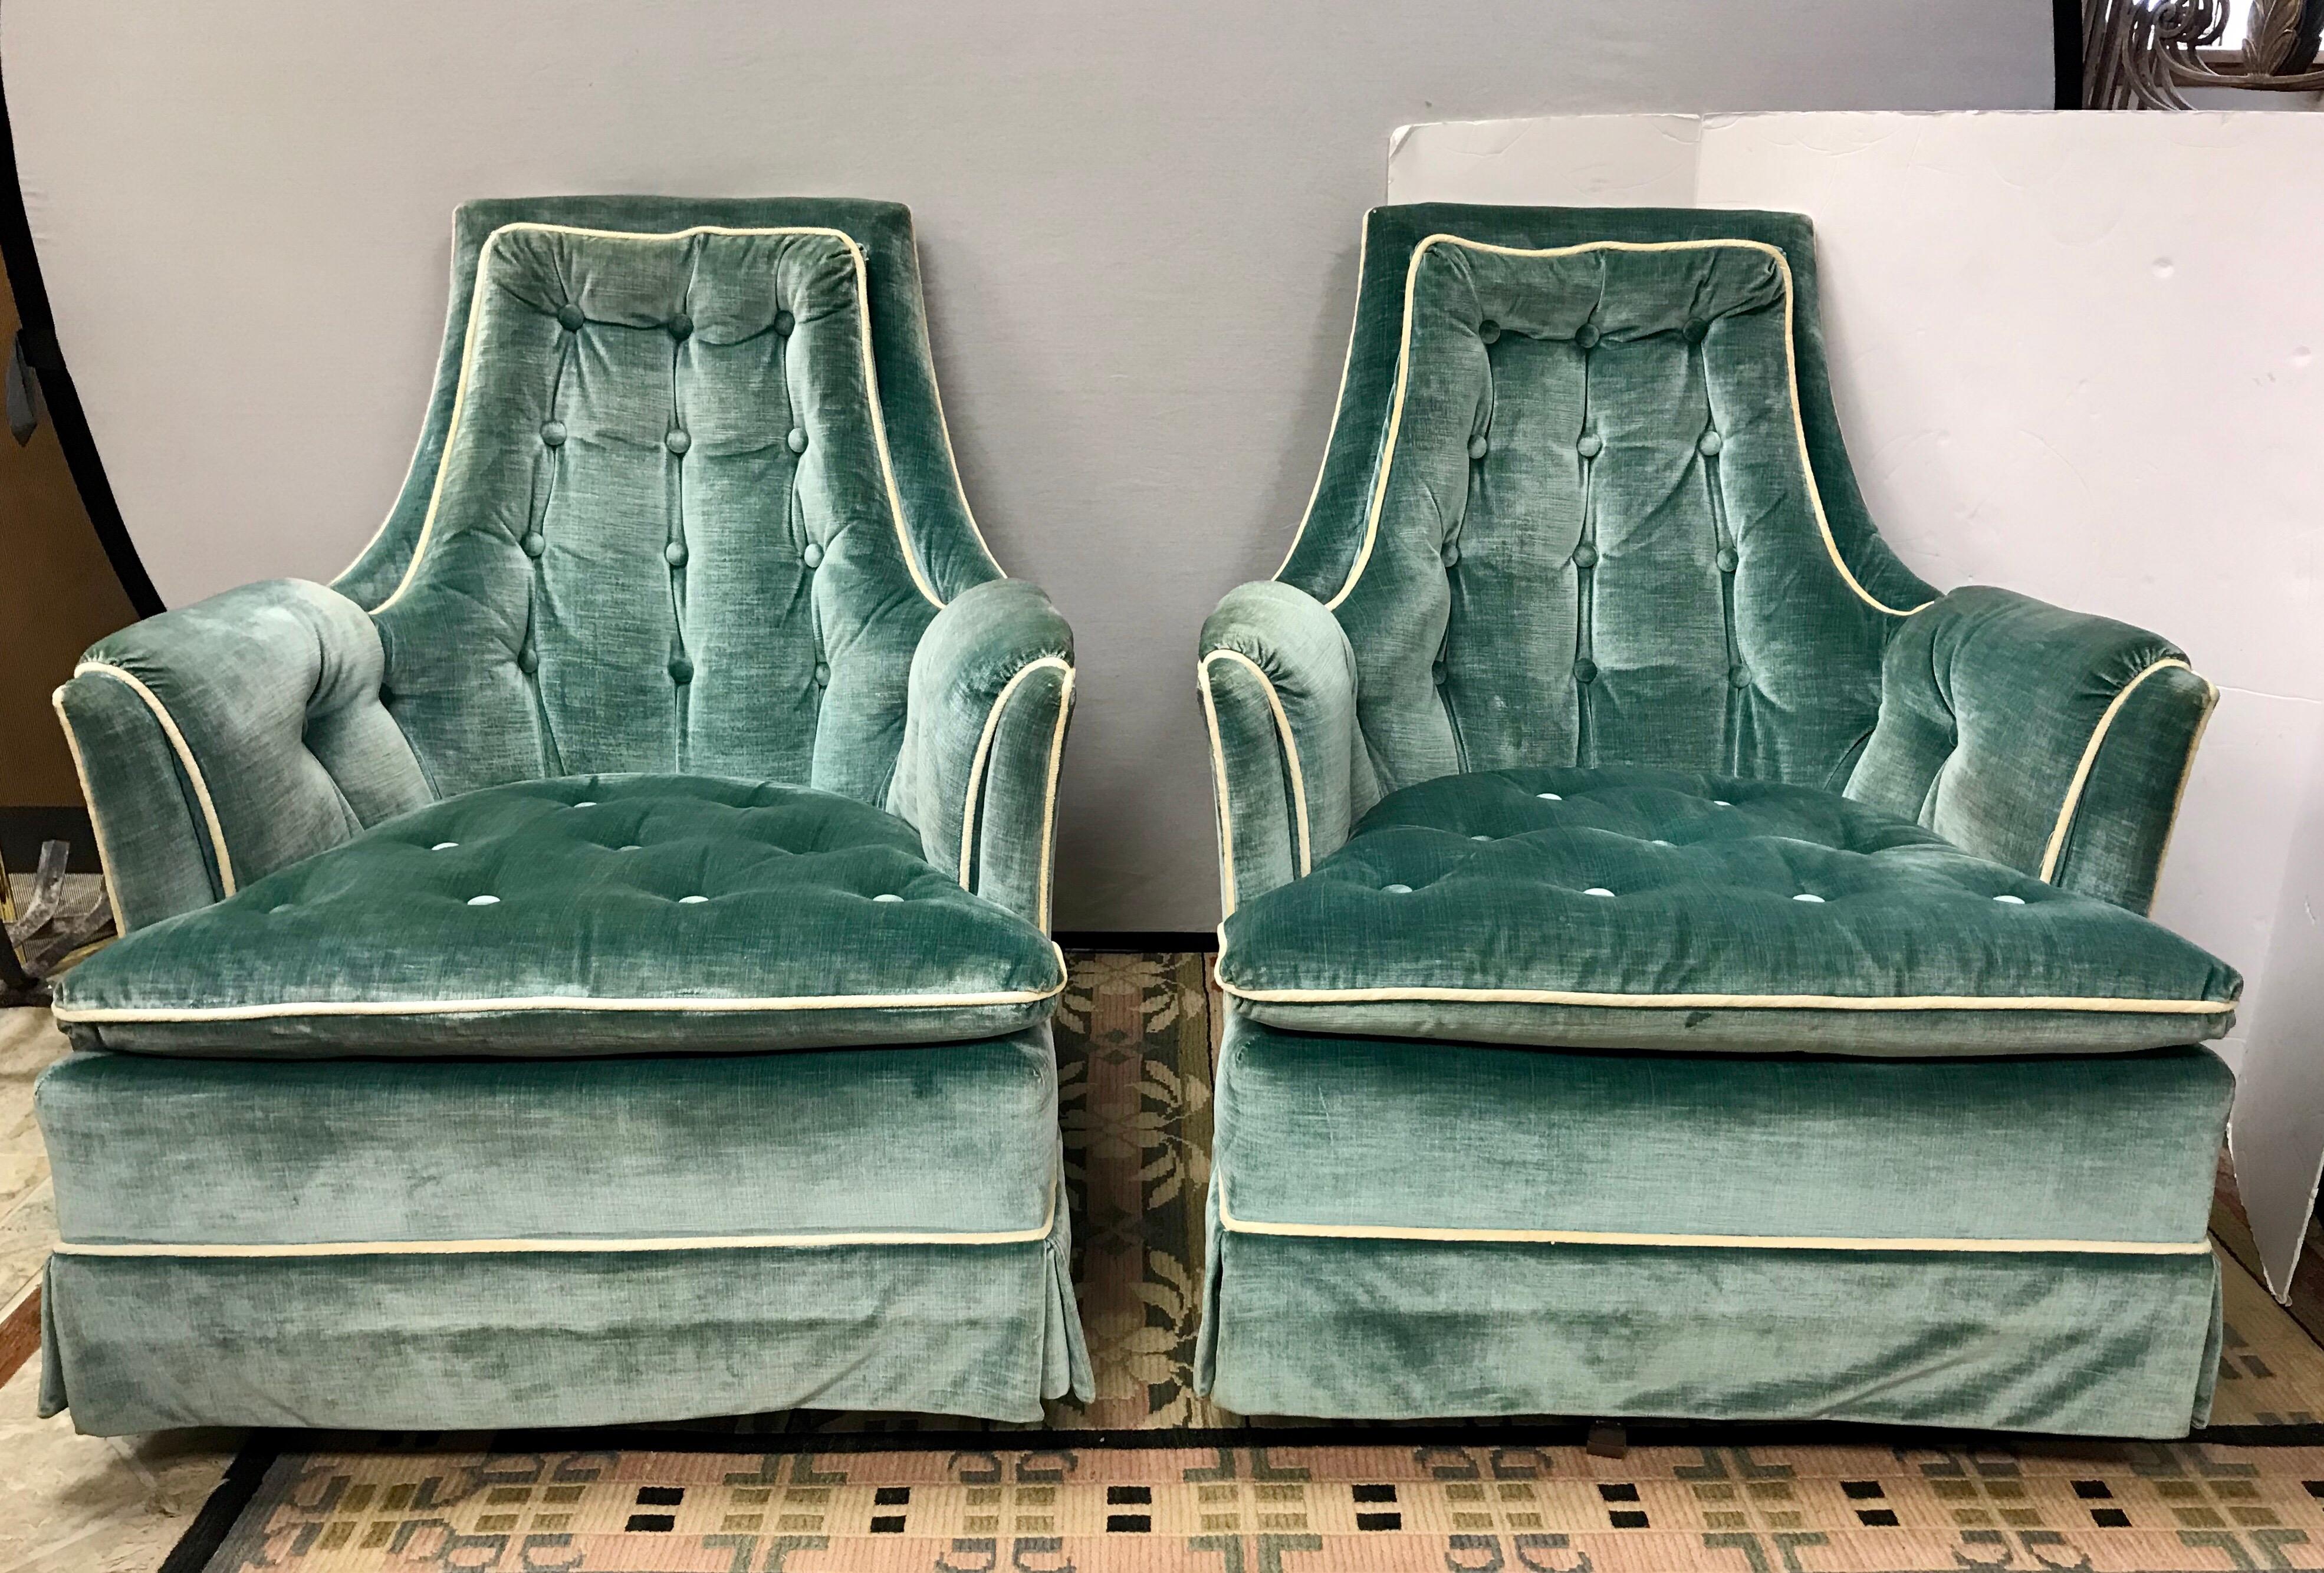 Midcentury 1960s velvet lounge chairs with button tufted back and seats in a beautiful robin’s egg blue color. Chairs rock and swivel 360 degrees and are super comfortable.